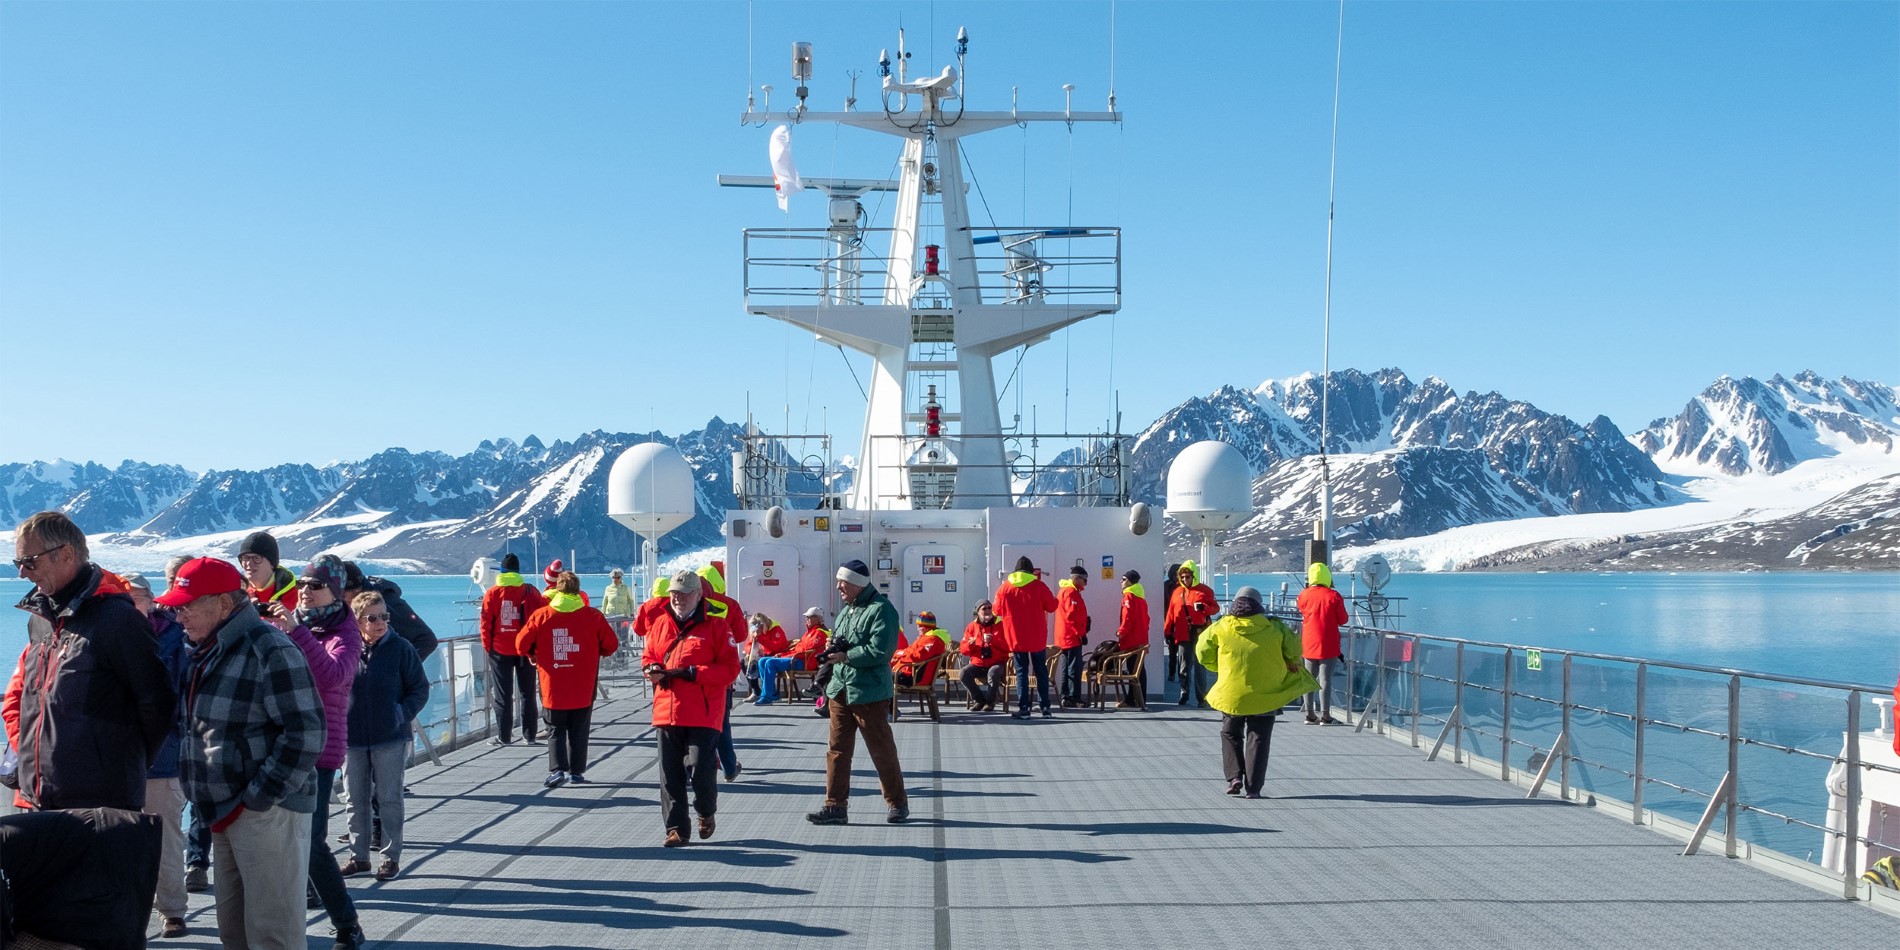 View from upper deck of MS Spitsbergen - Photo Credit: Stefan Dall